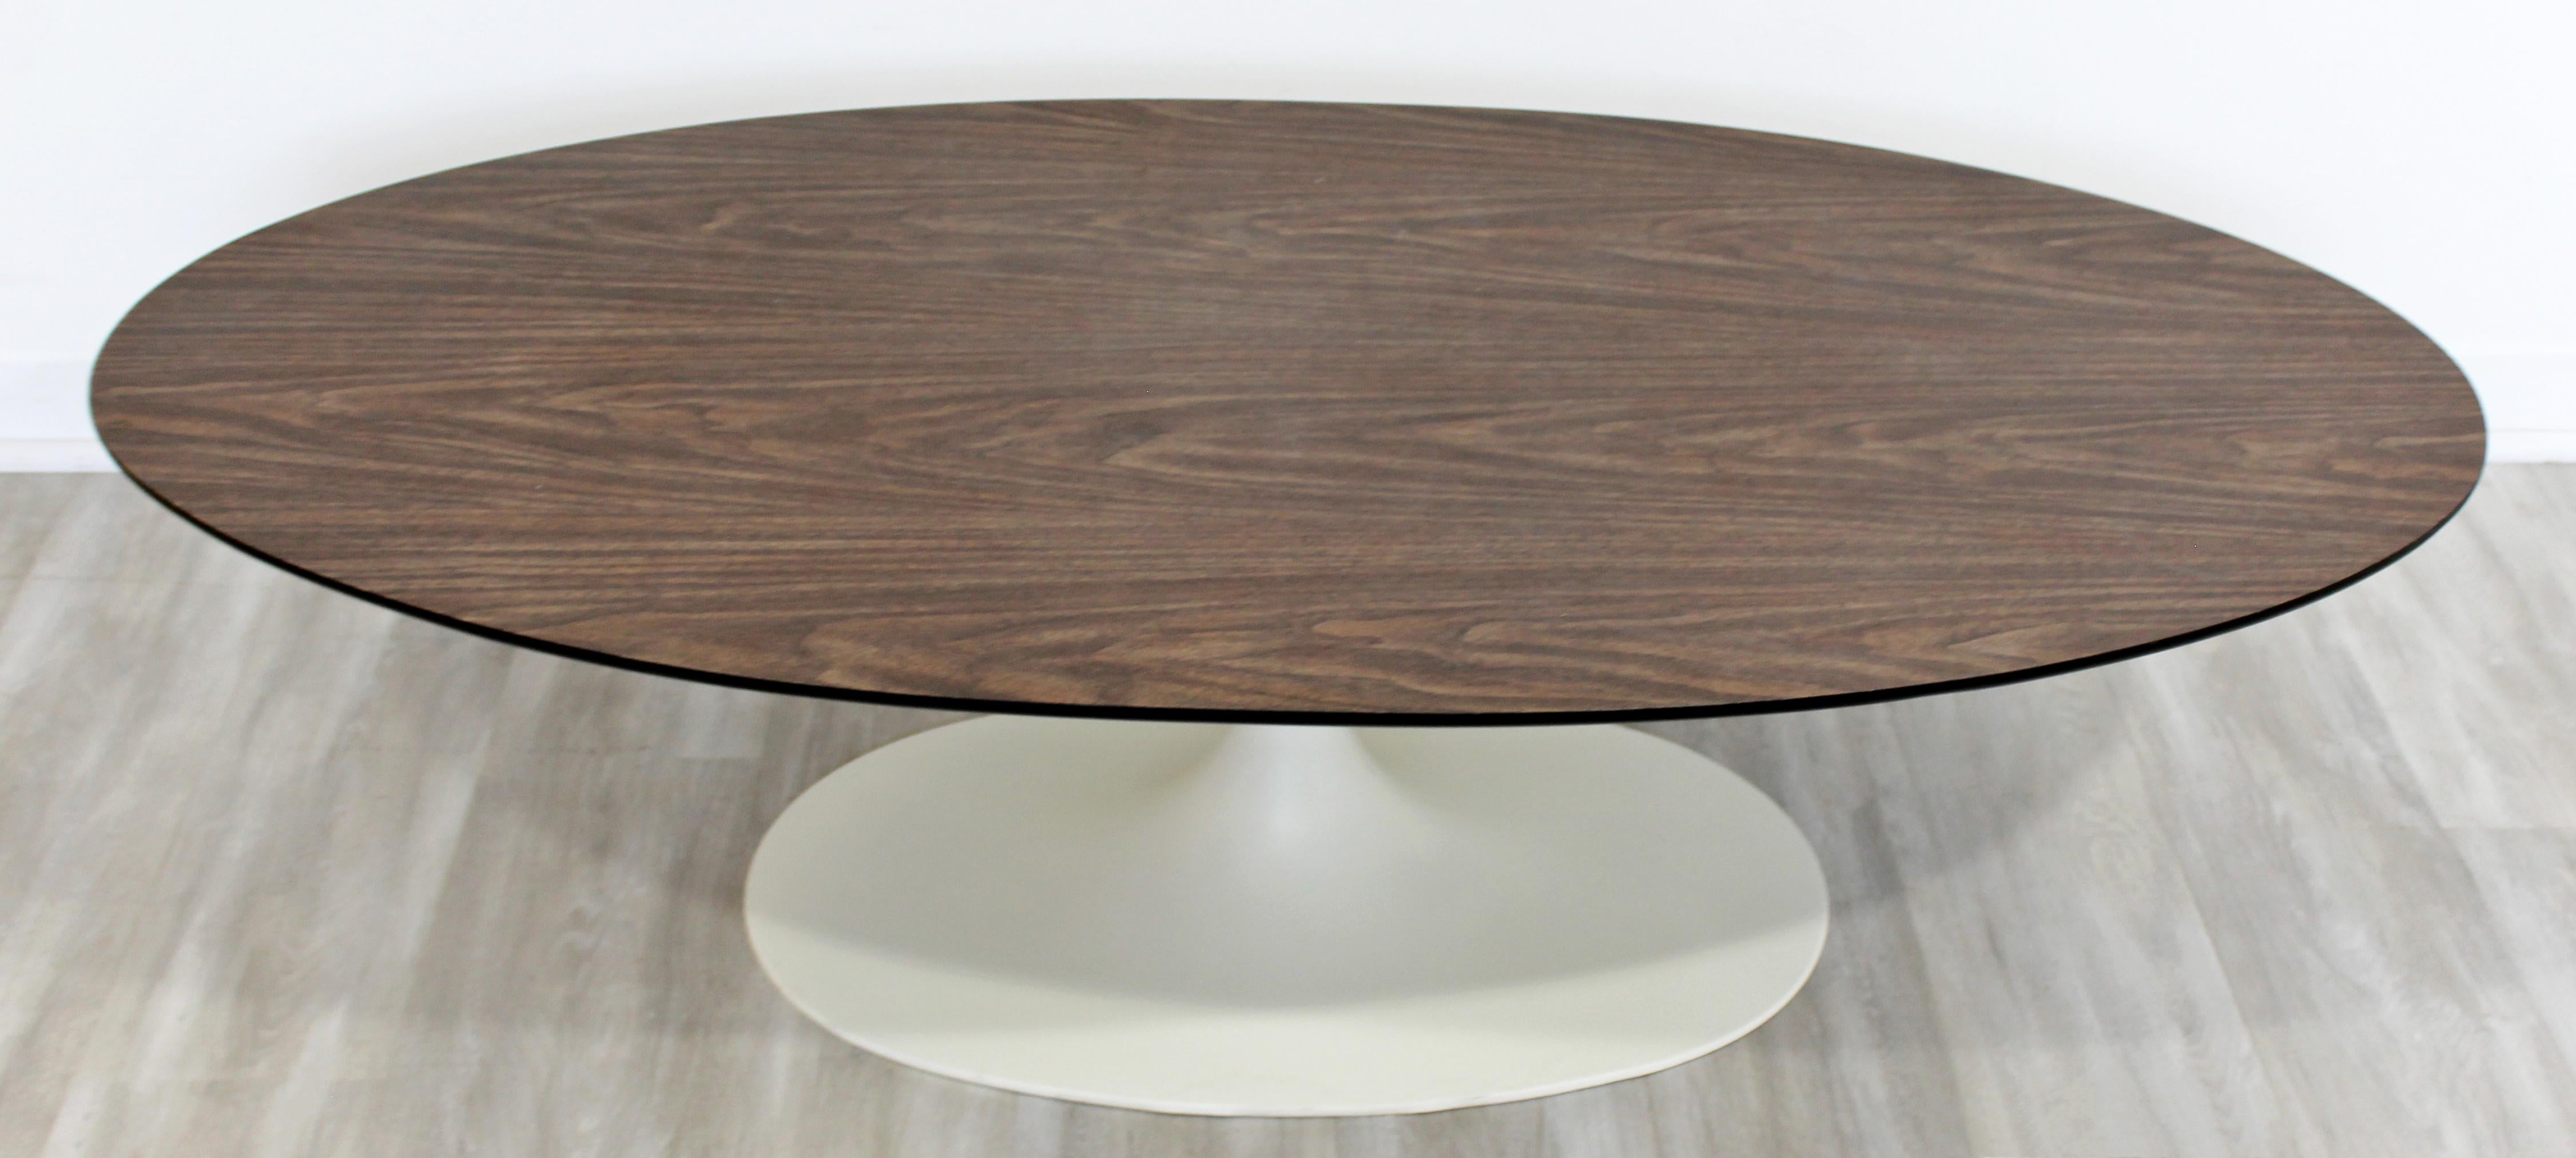 For your consideration is a stupendous, Formica wood topped coffee table, on a Saarinen 